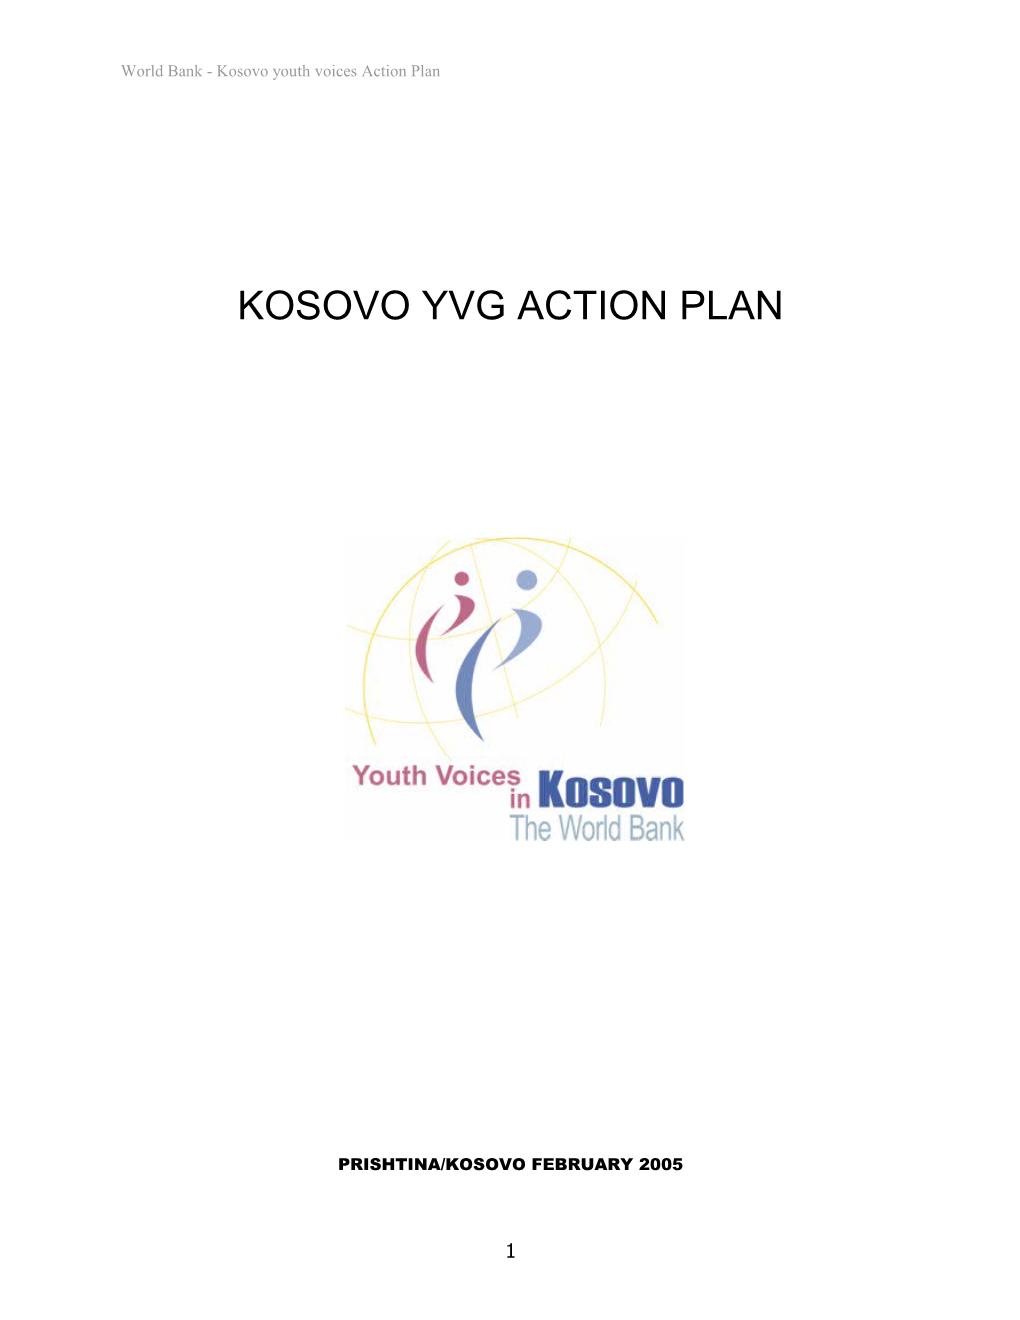 World Bank - Kosovo Youth Voices Action Plan